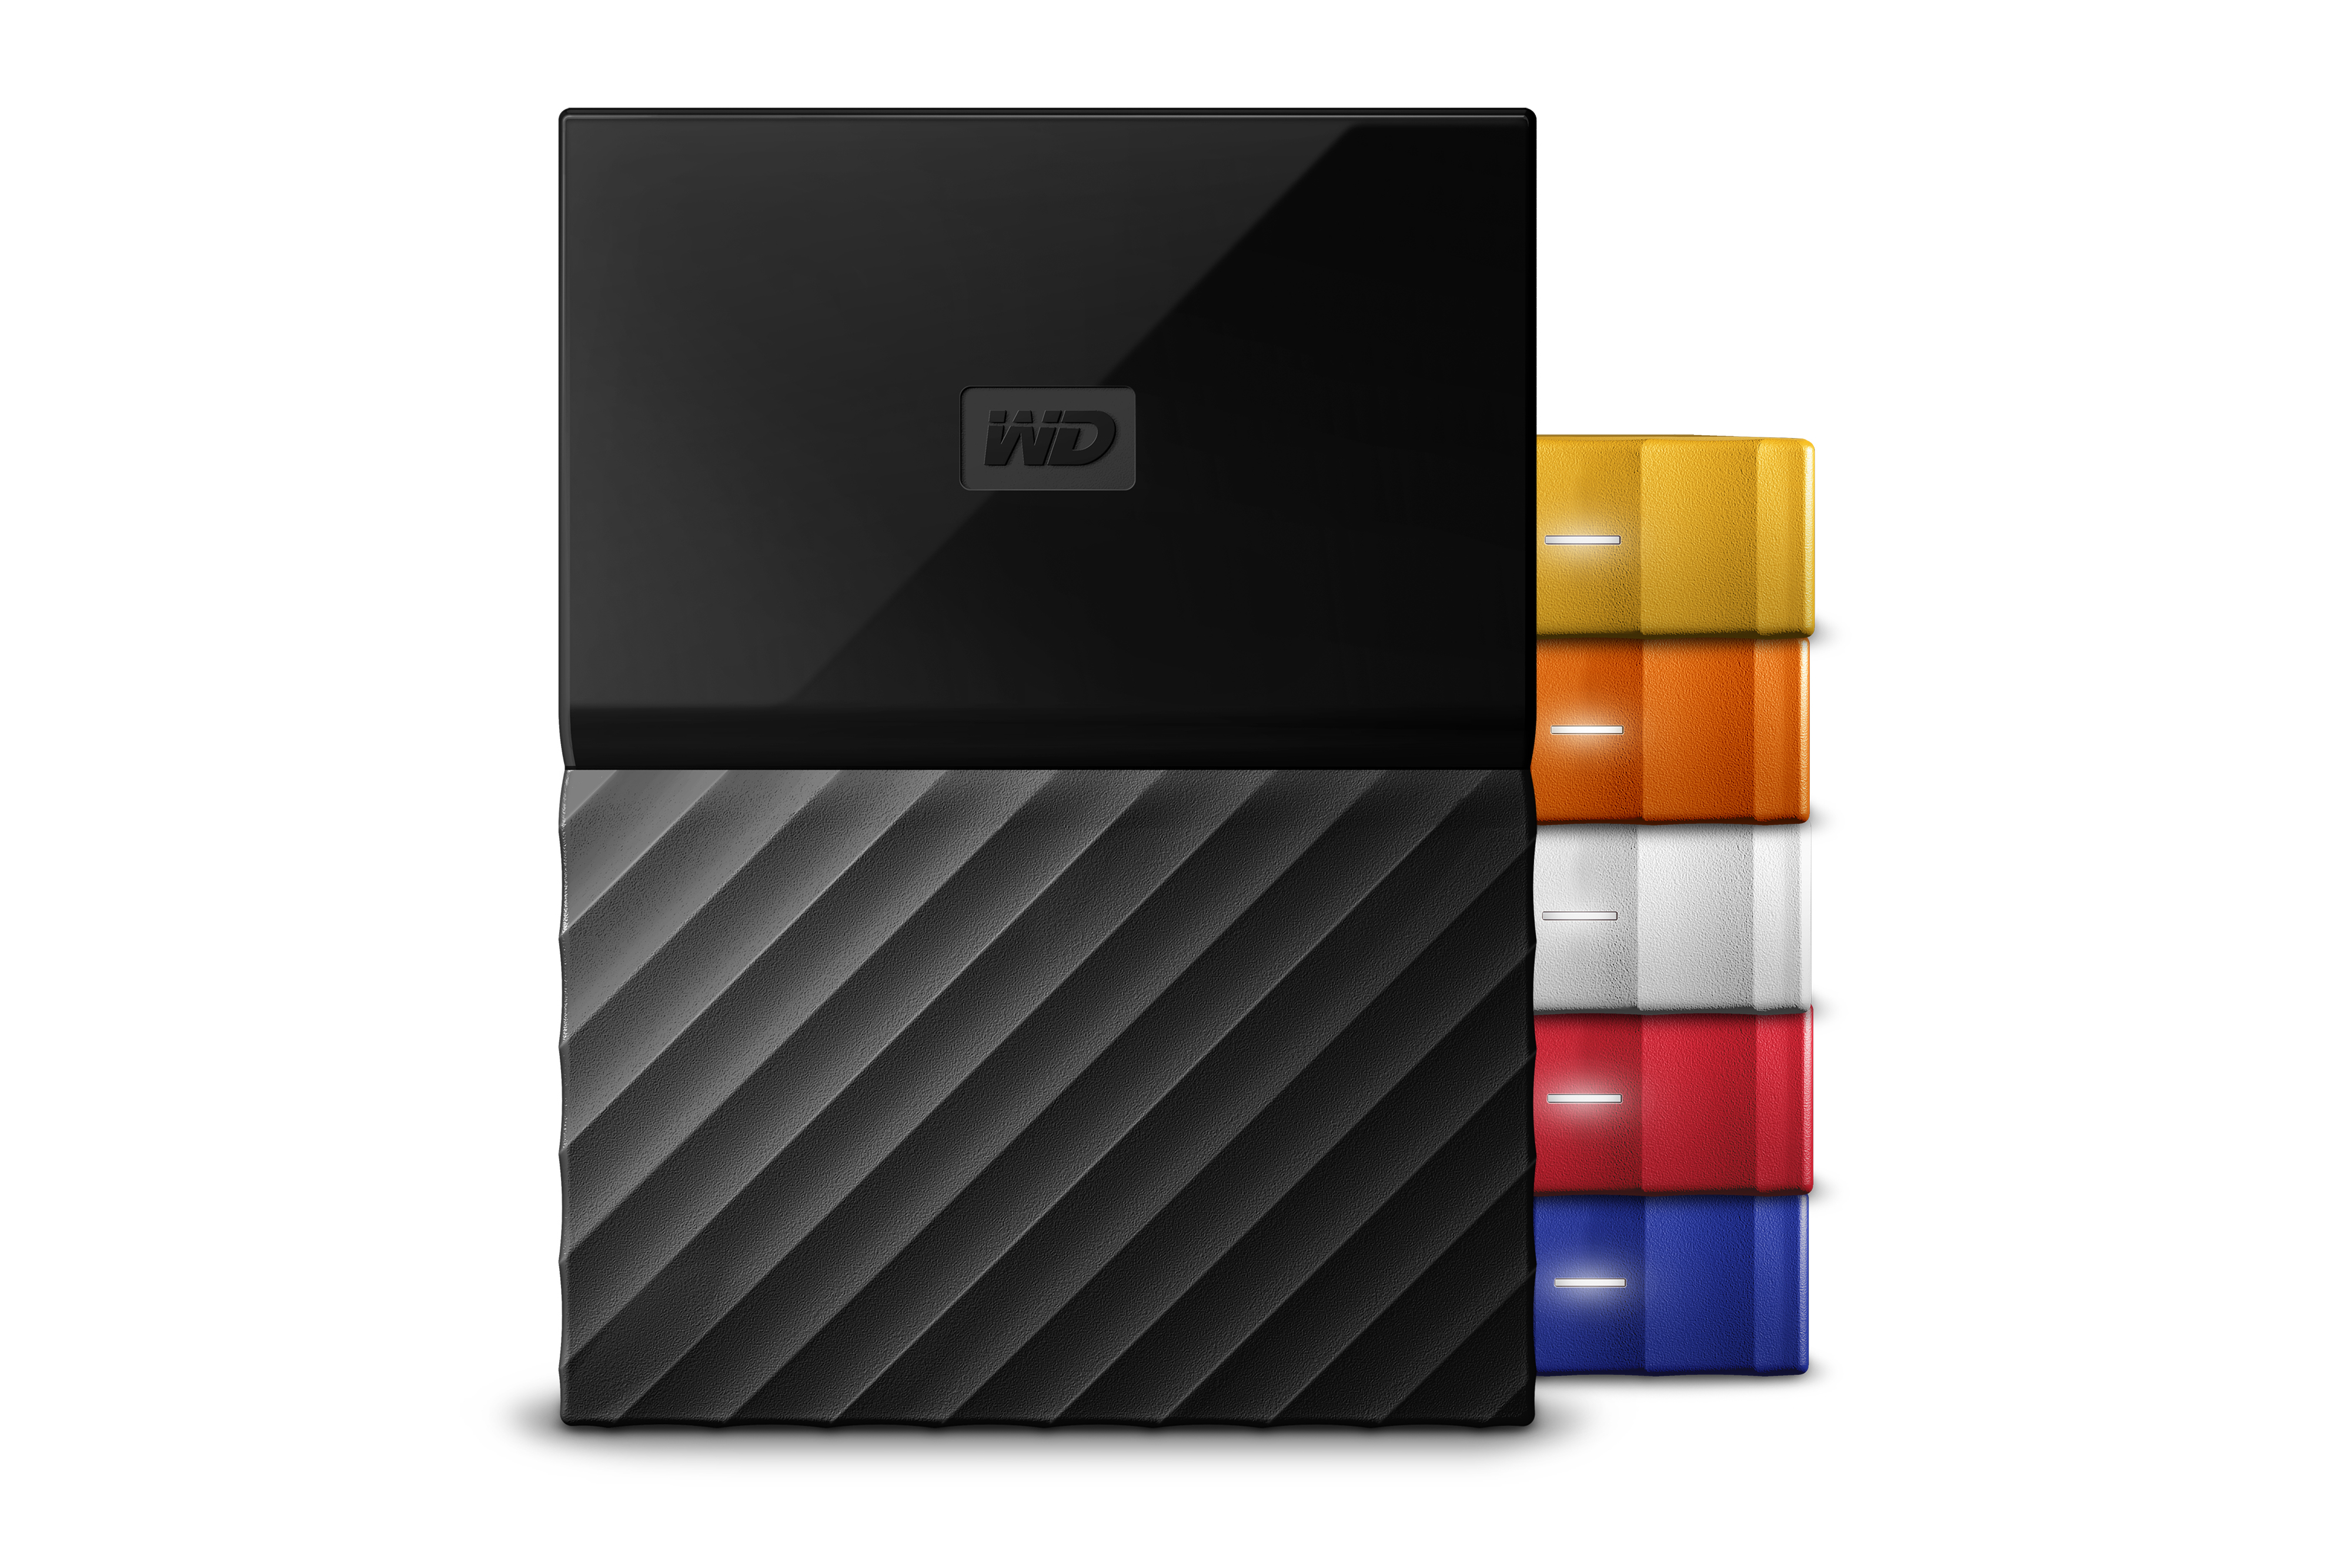 western digital releases redesigned portable hard drives wd mypassport stacked